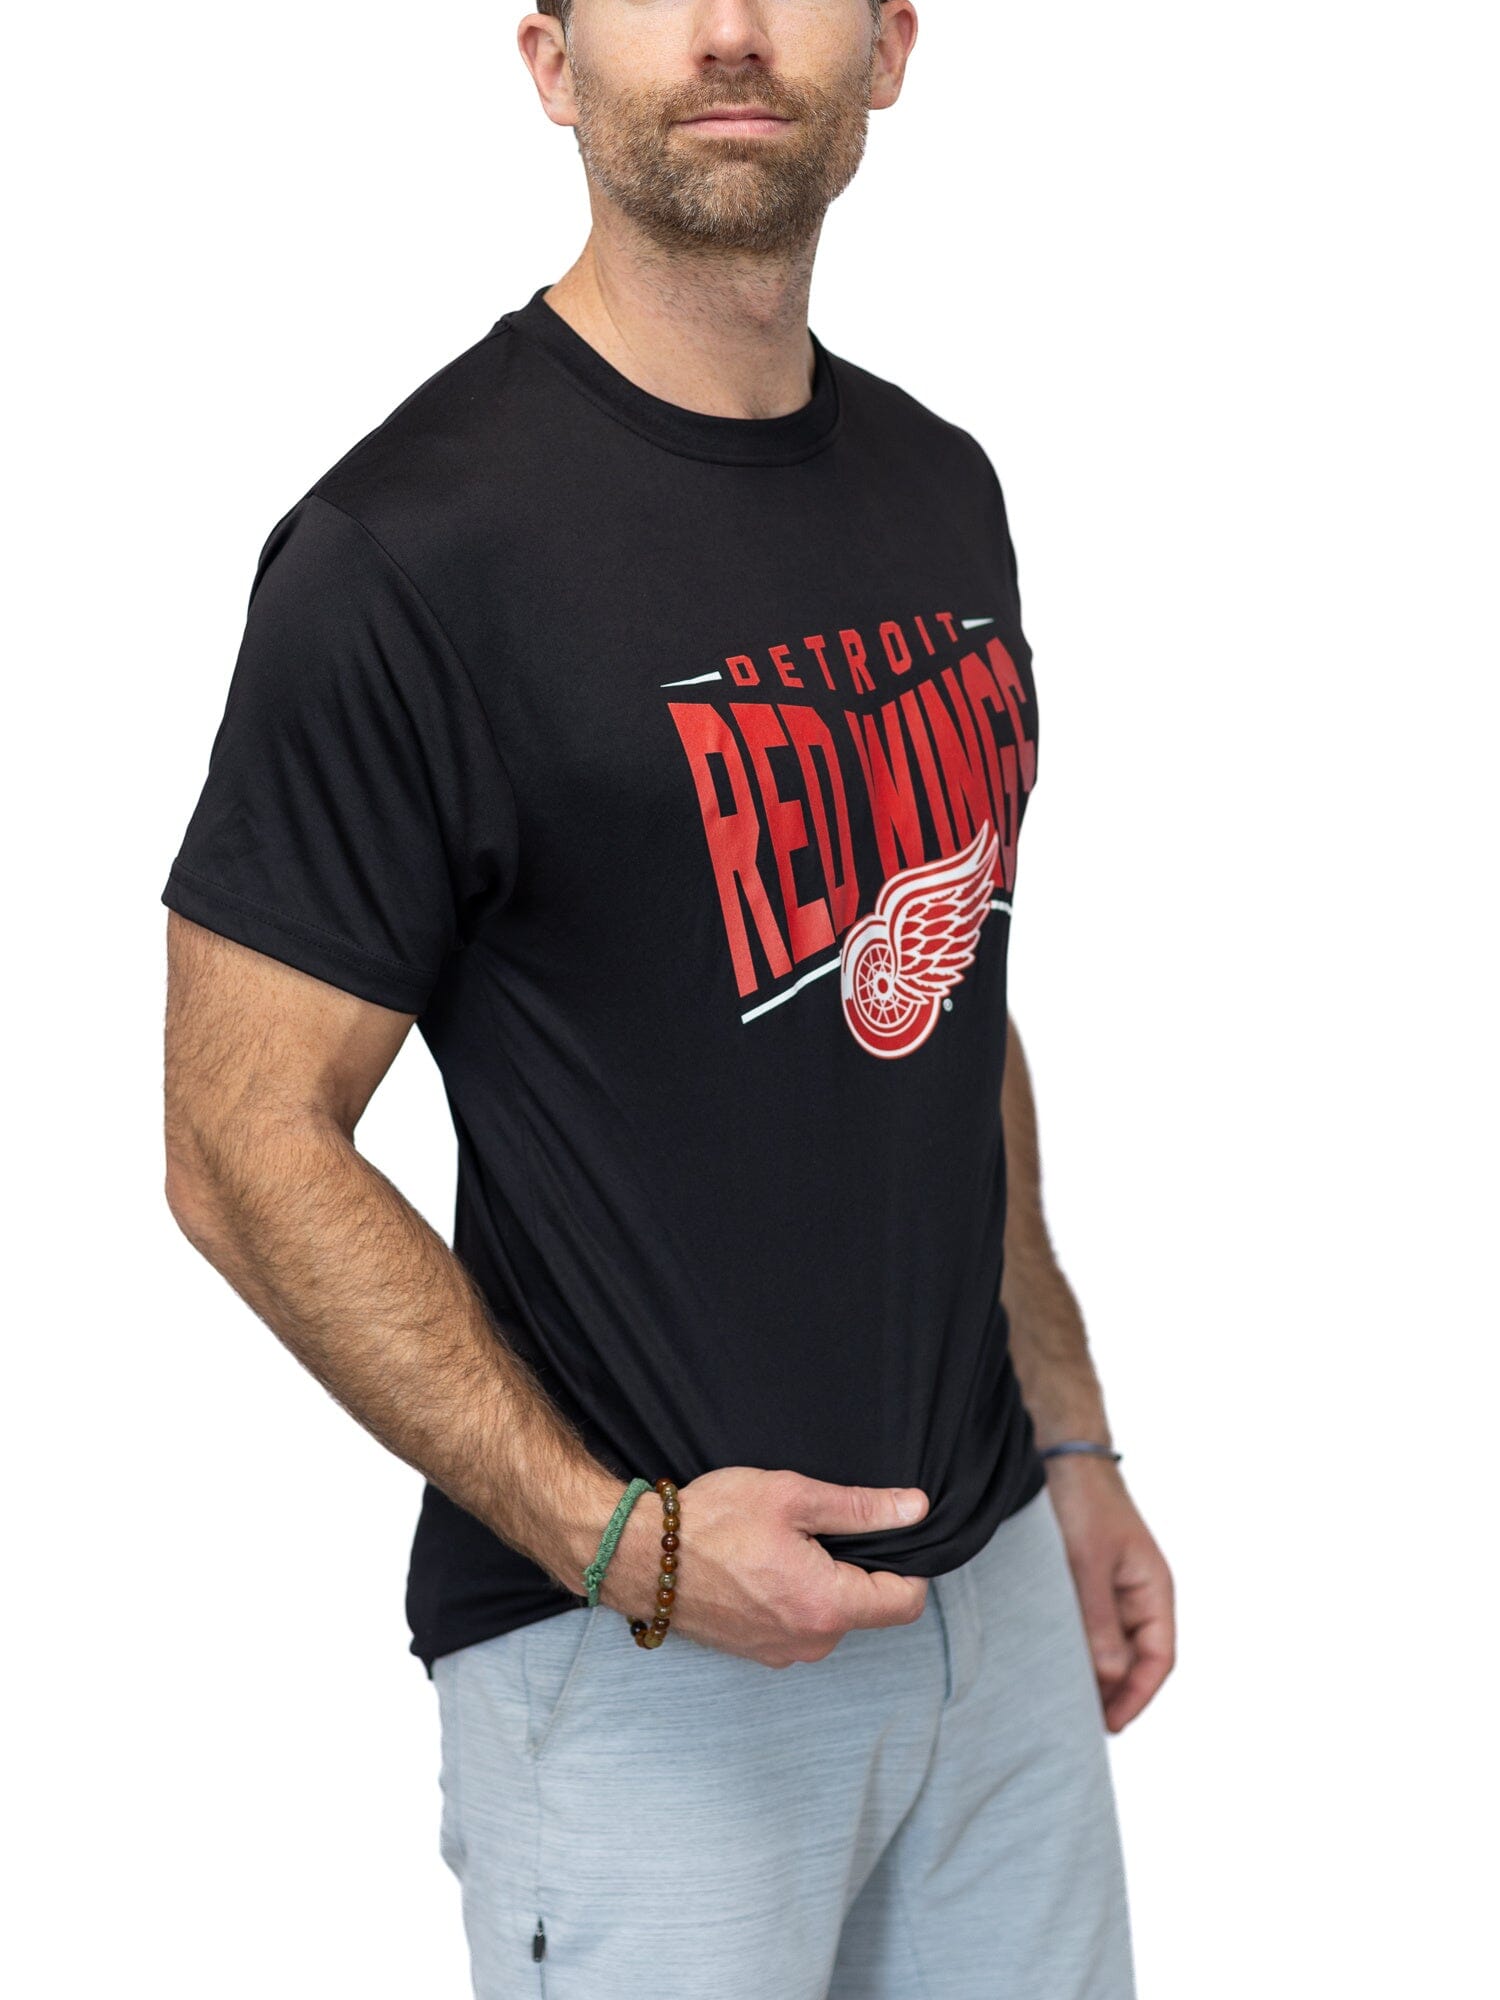 Detroit Red Wings 1996-97 jersey artwork, This is a highly …